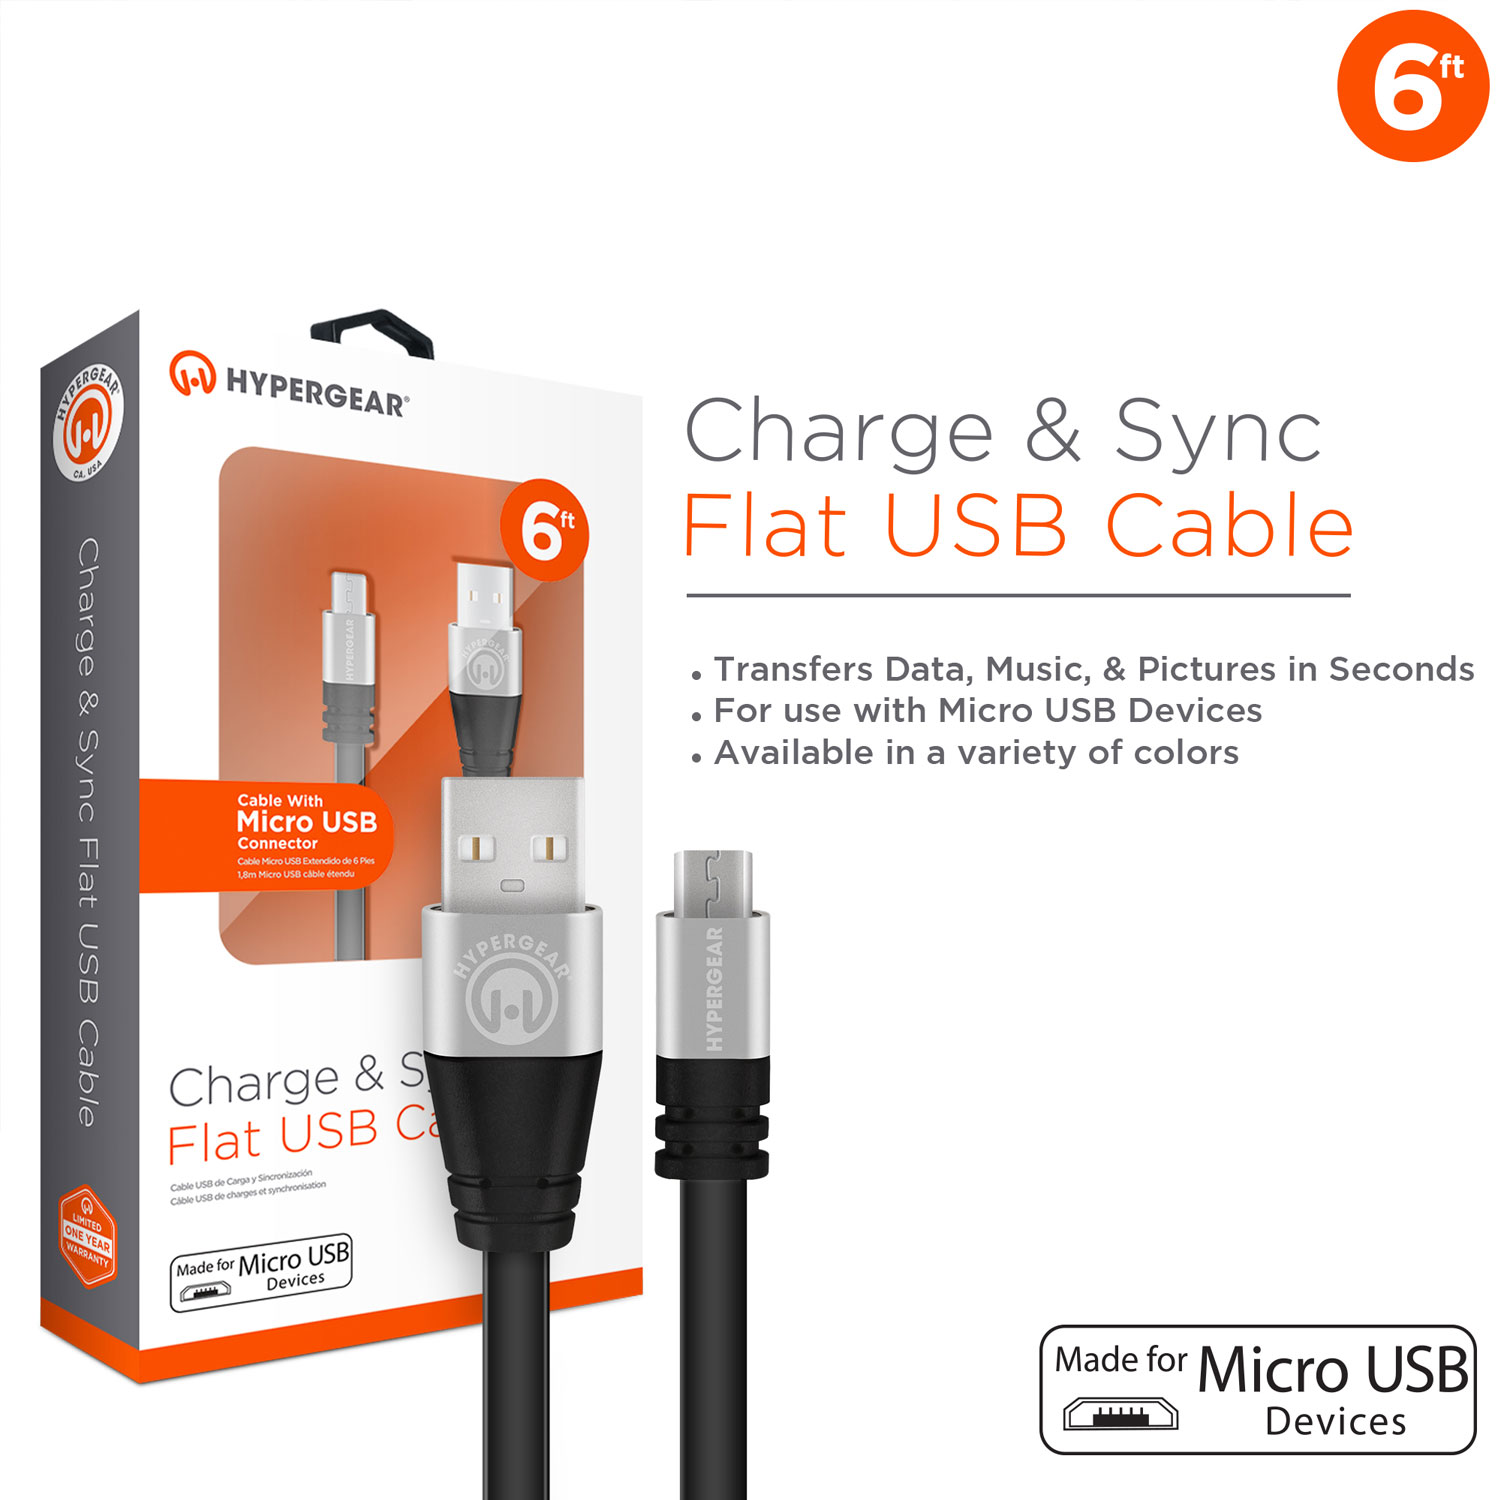 Flexi Micro USB 6ft. Charge & Sync Cable